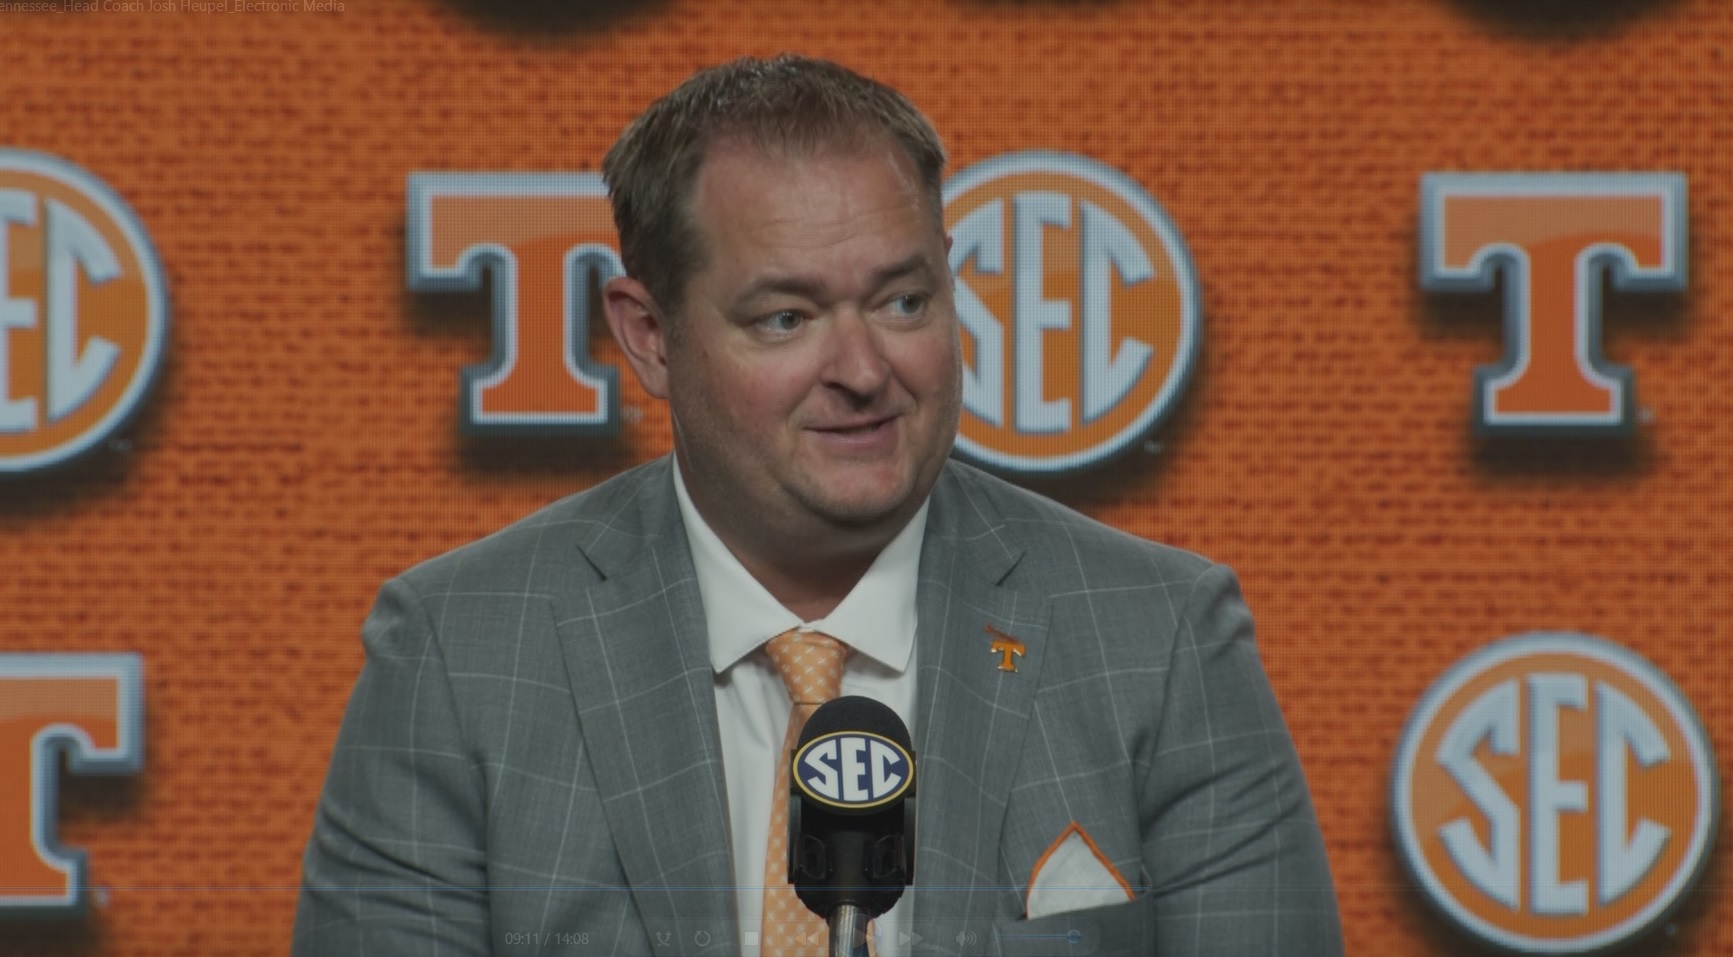 WATCH: Josh Heupel – Tennessee HC – Electronic Media Room at #SECMD23